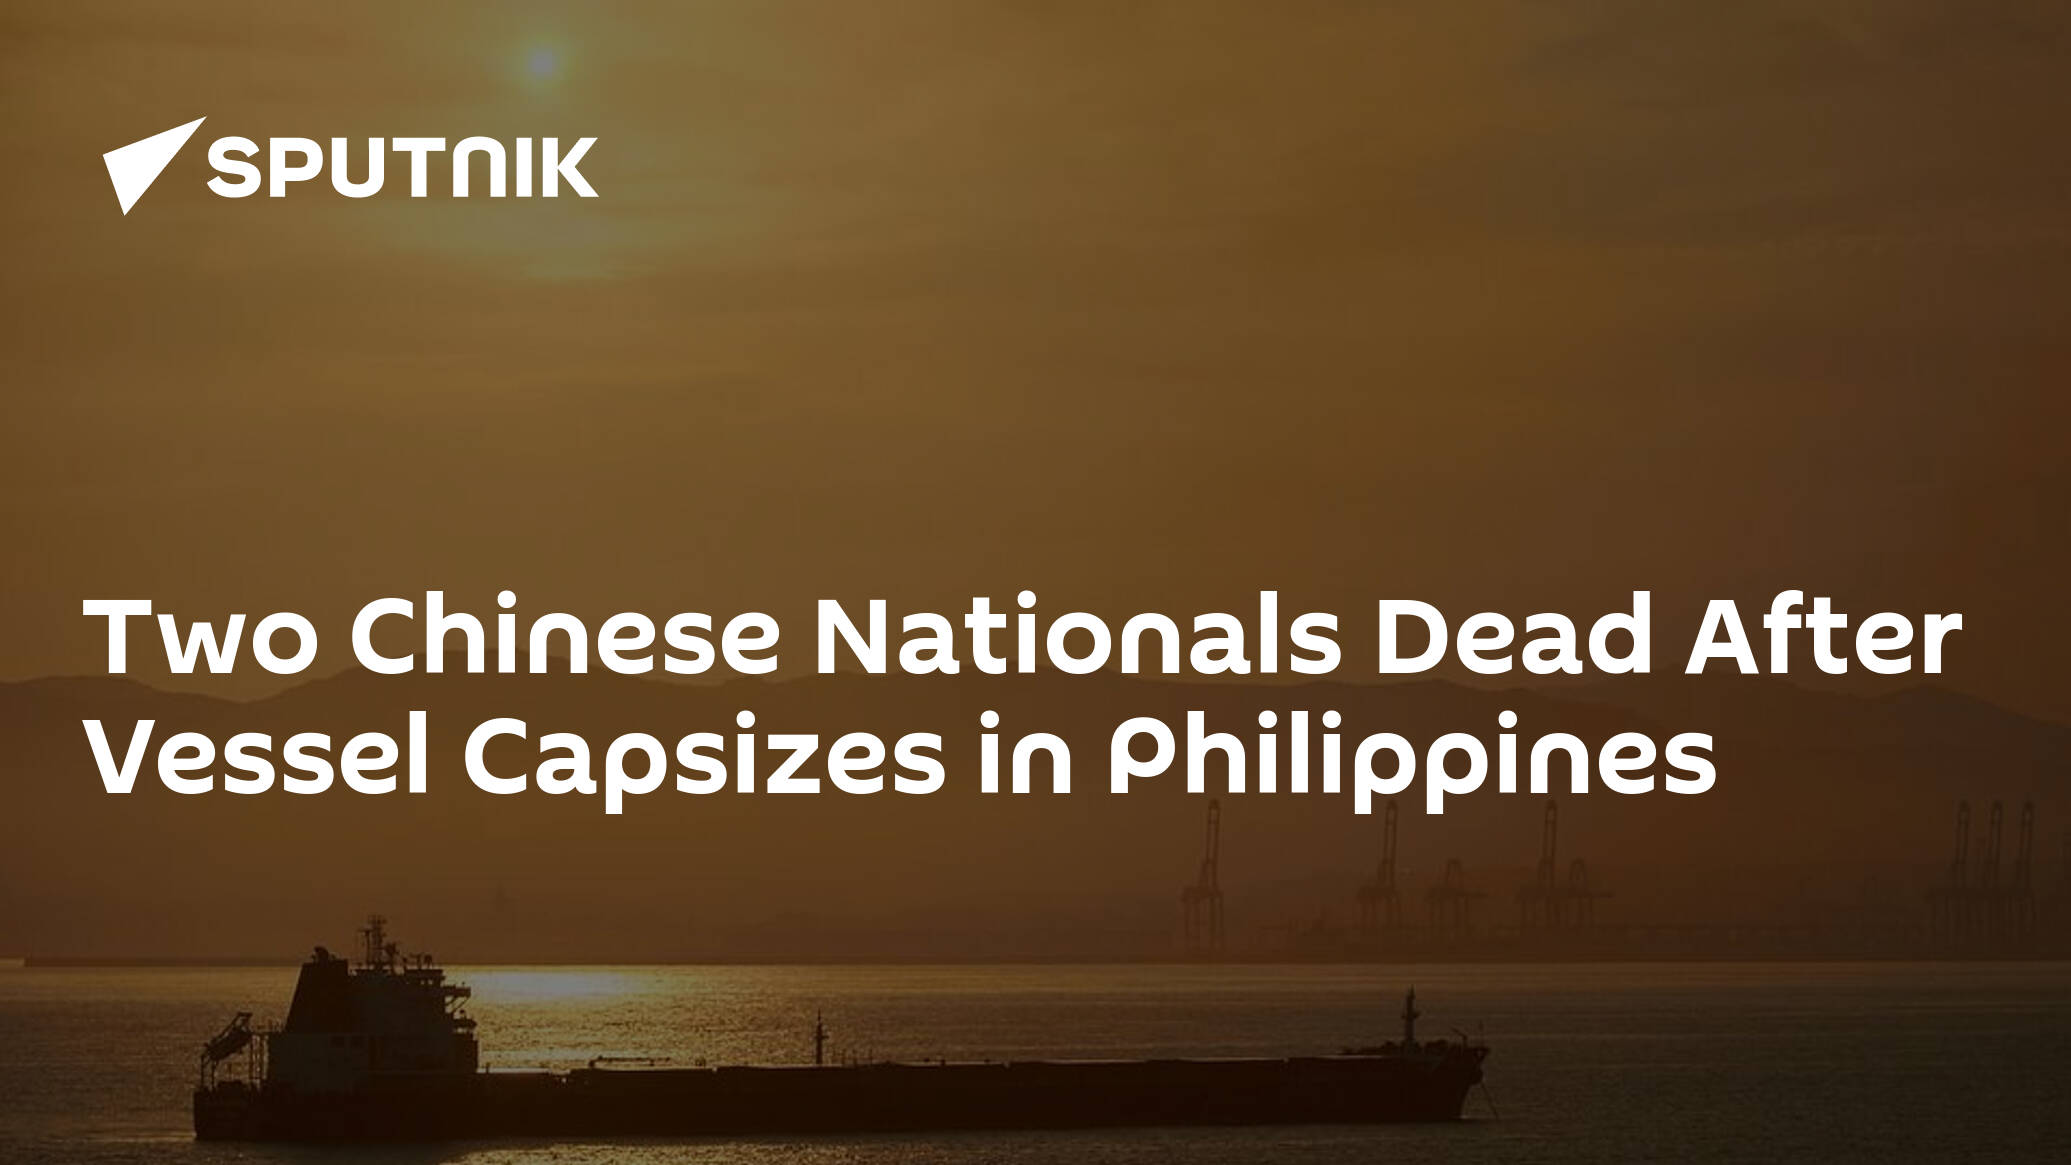 Two Chinese Nationals Dead After Vessel Capsizes in Philippines